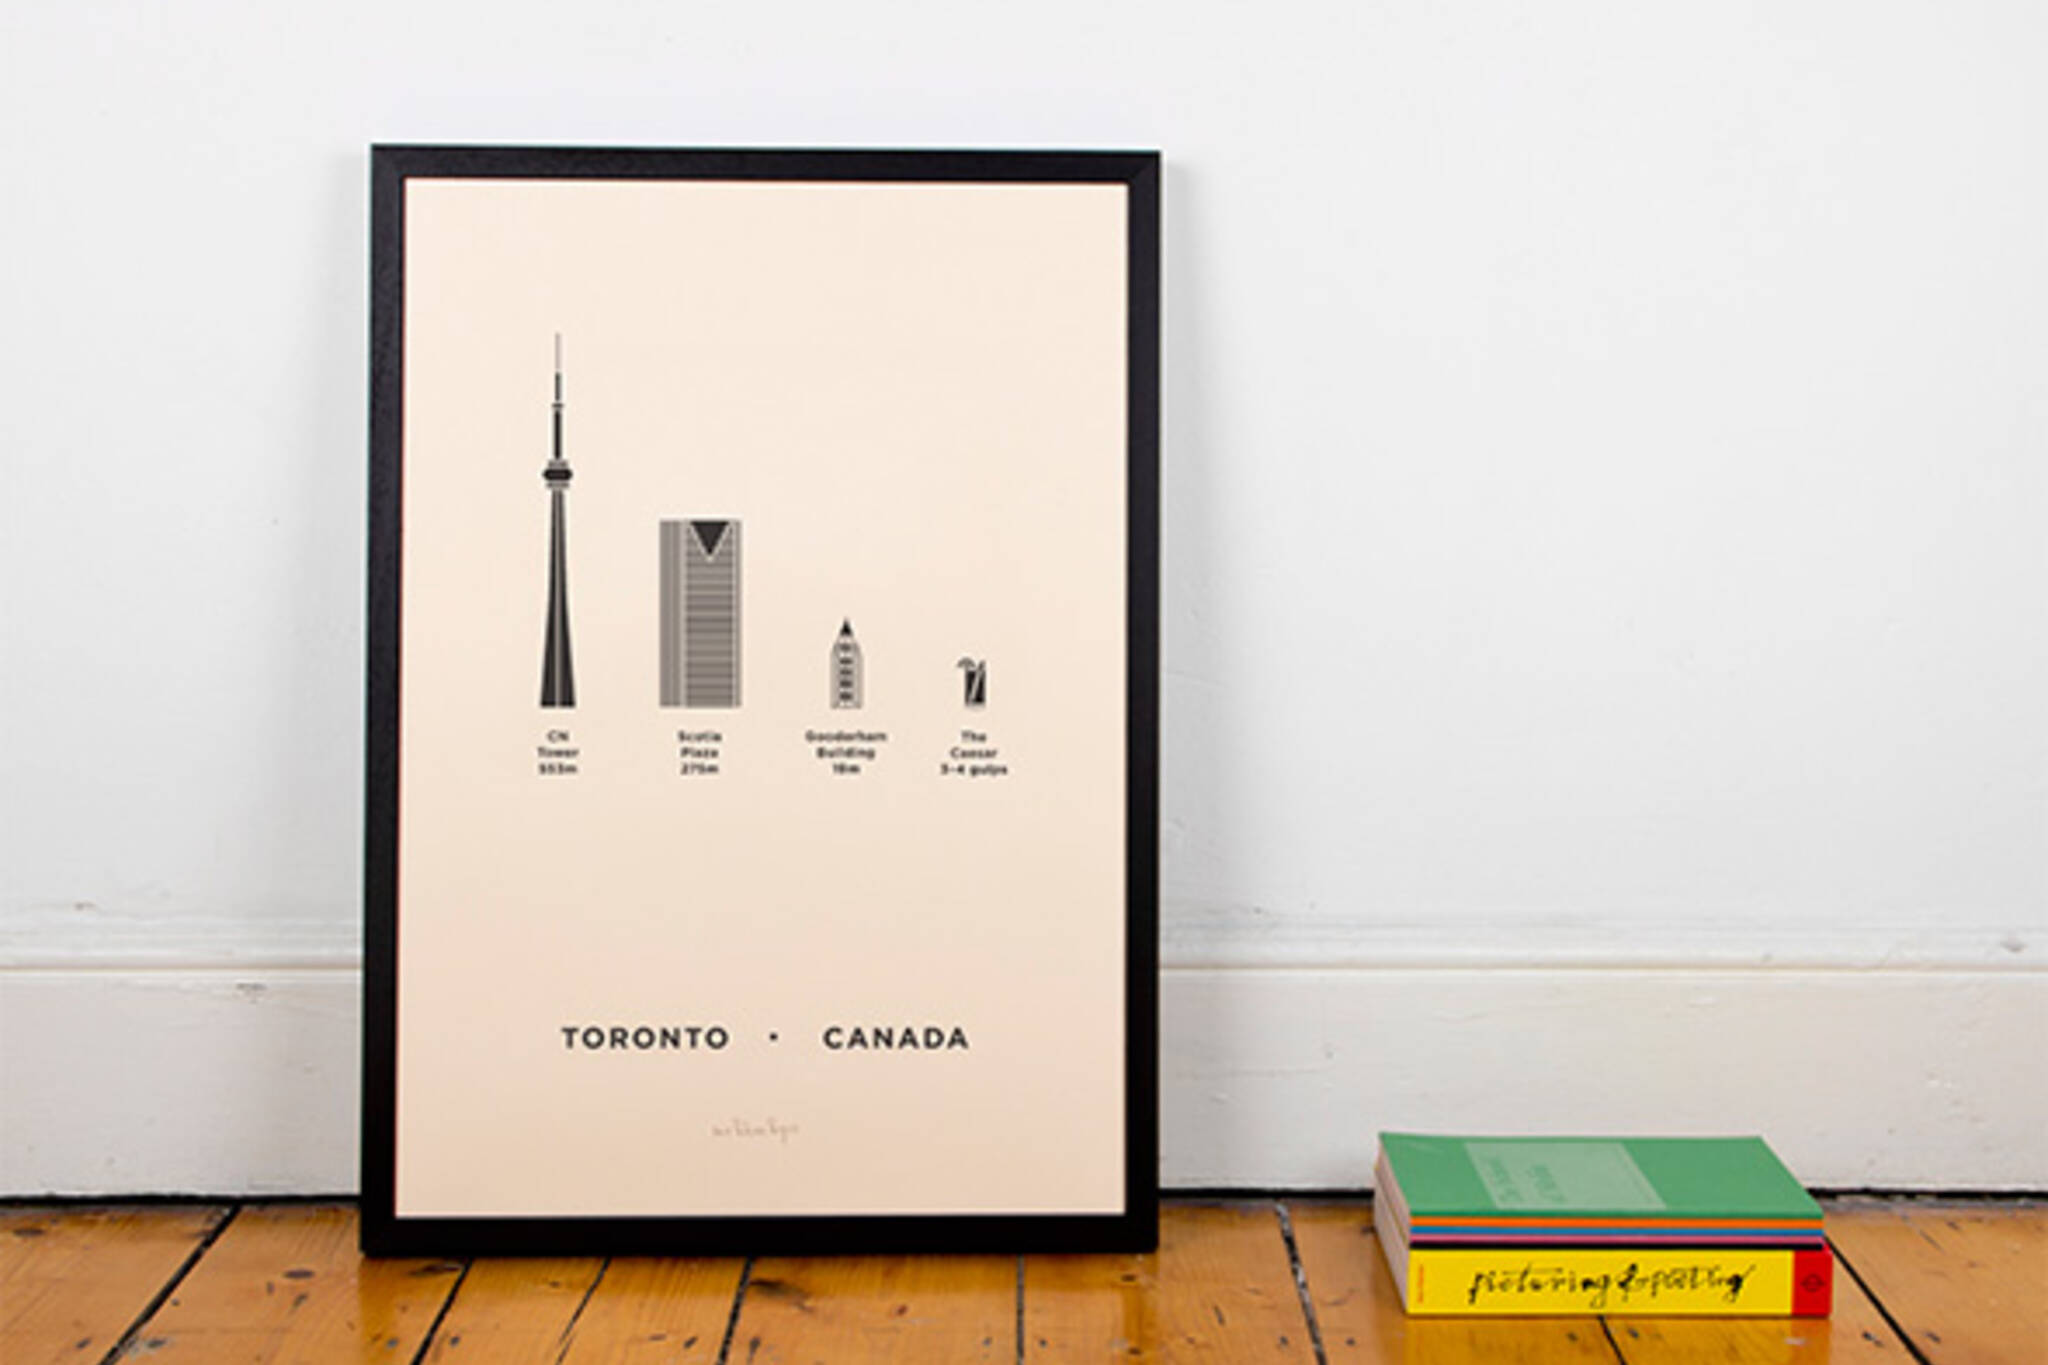 Toronto themed gifts